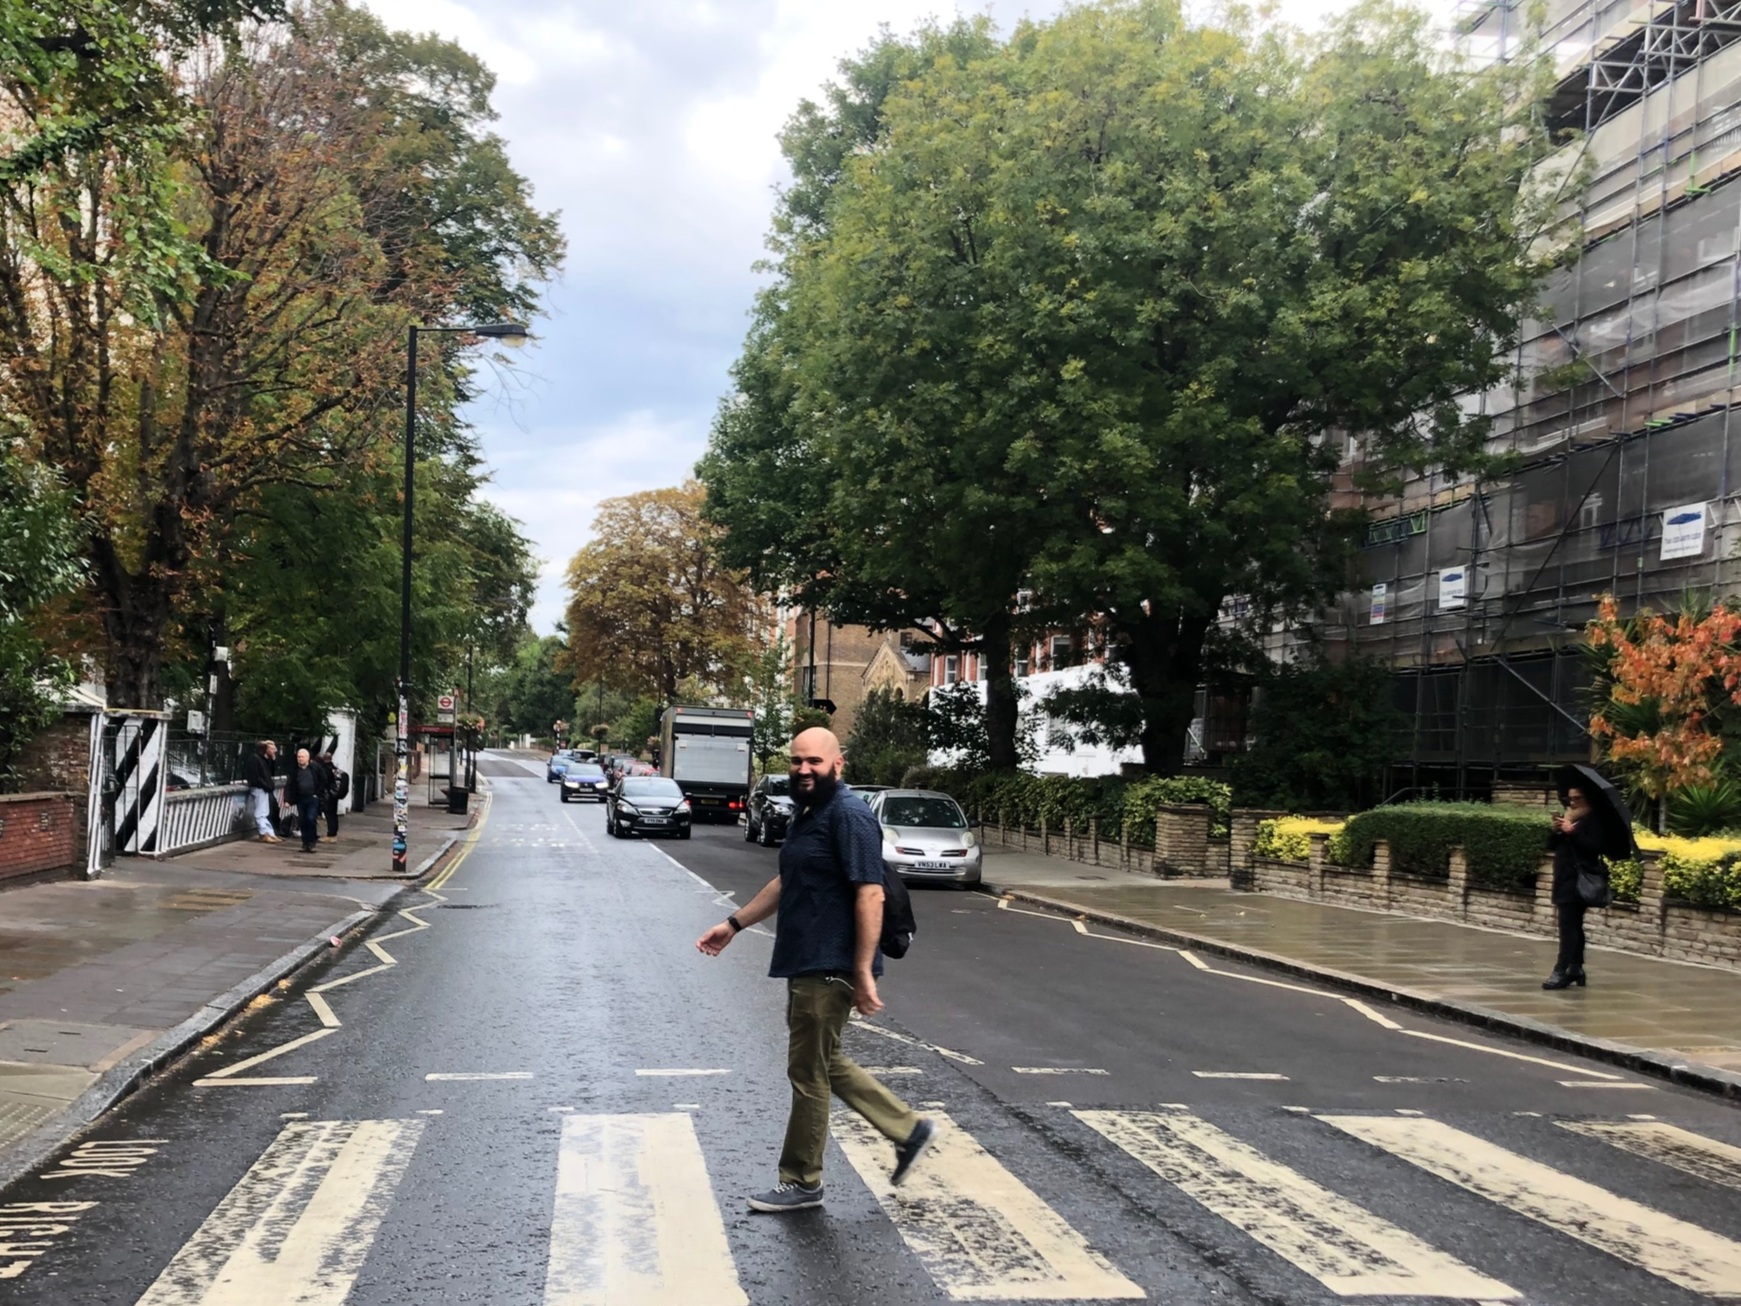 Obligatory photo of me at the Abbey Road zebra crossing